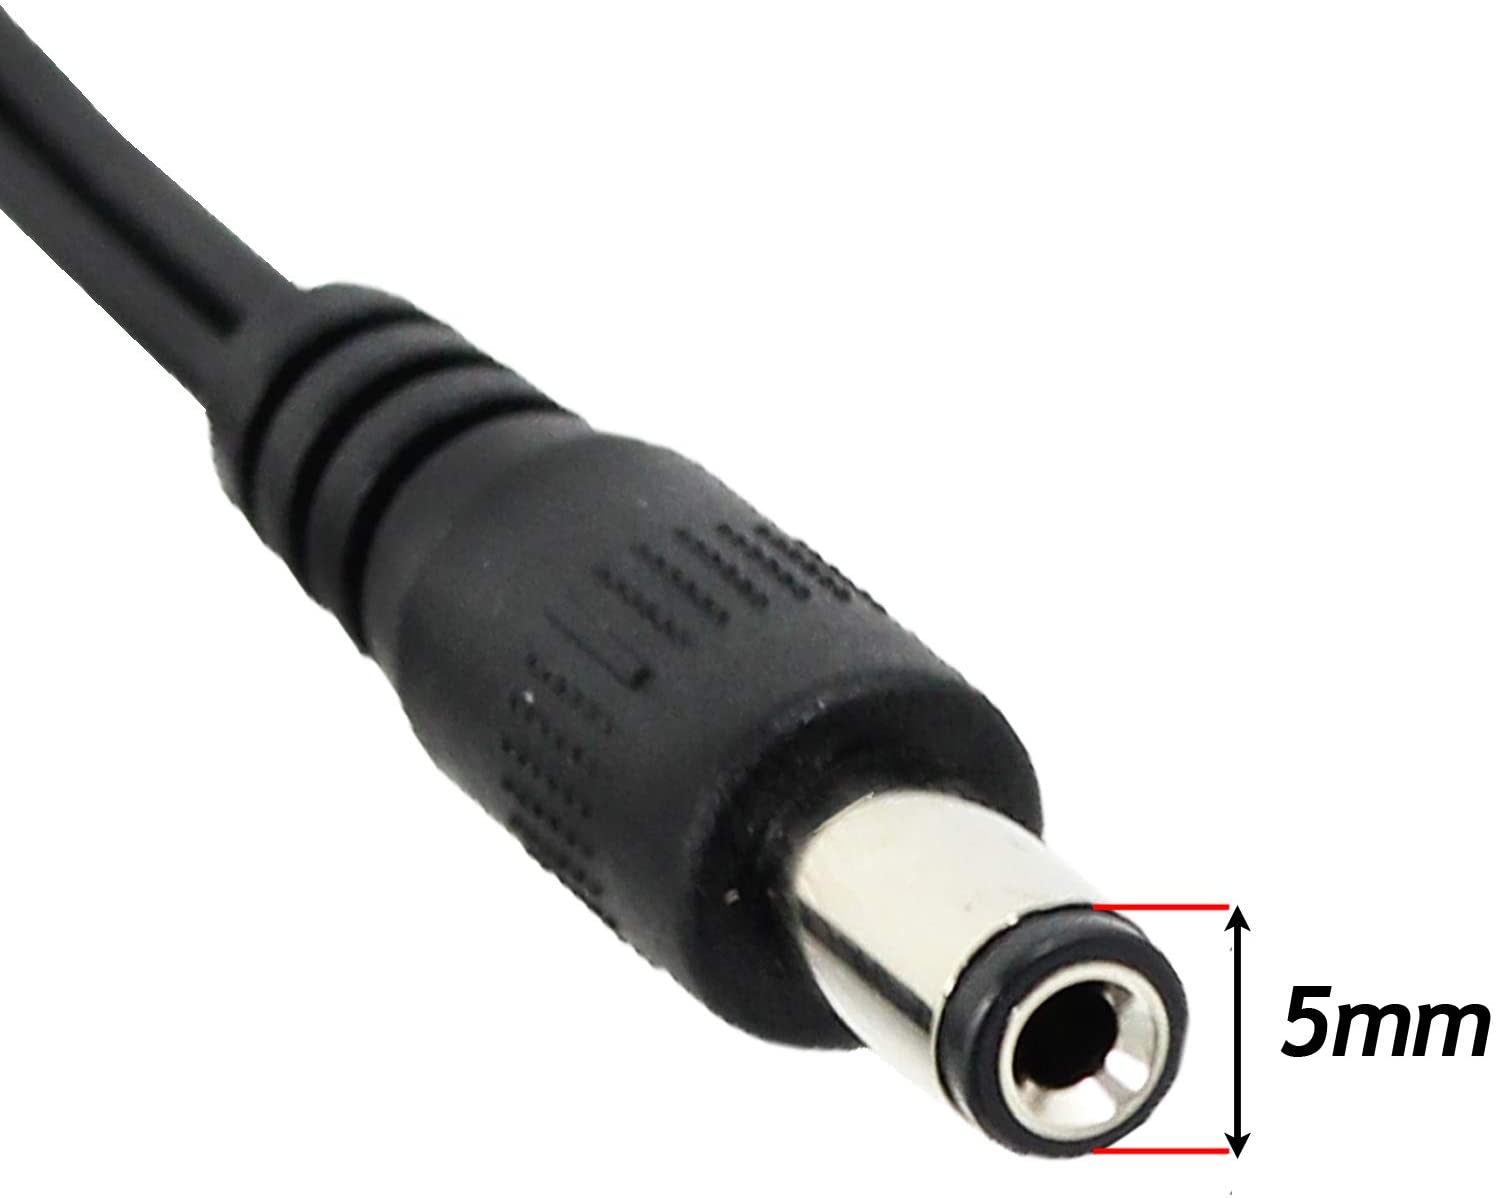 Vacuum Cleaner Charger Cable for HOOVER 22.2v UK Plug FD22 Freedom 001